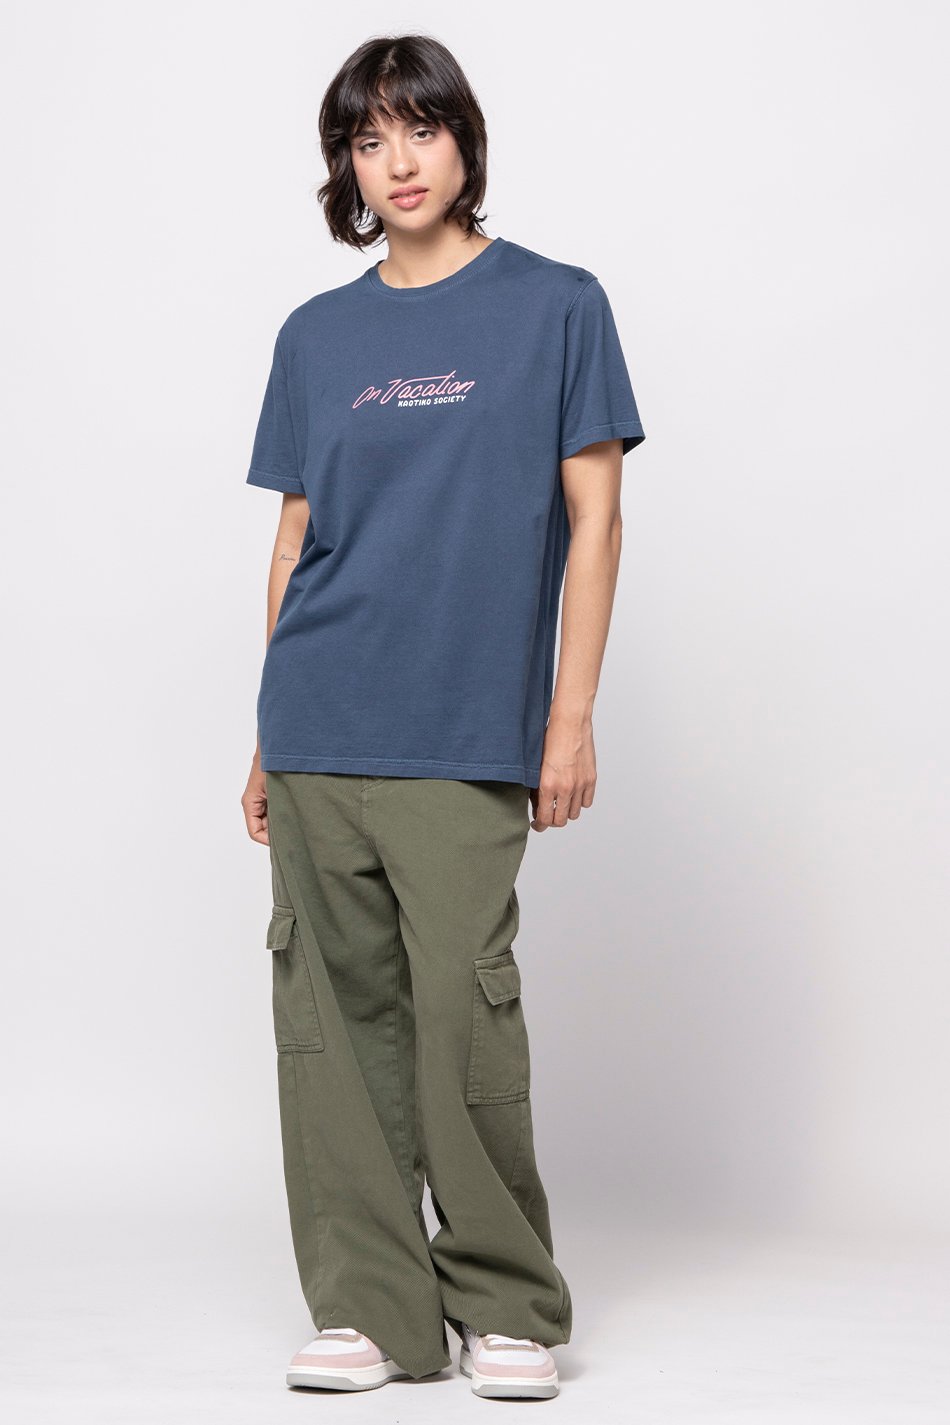 Navy On Vacation Washed T-shirt